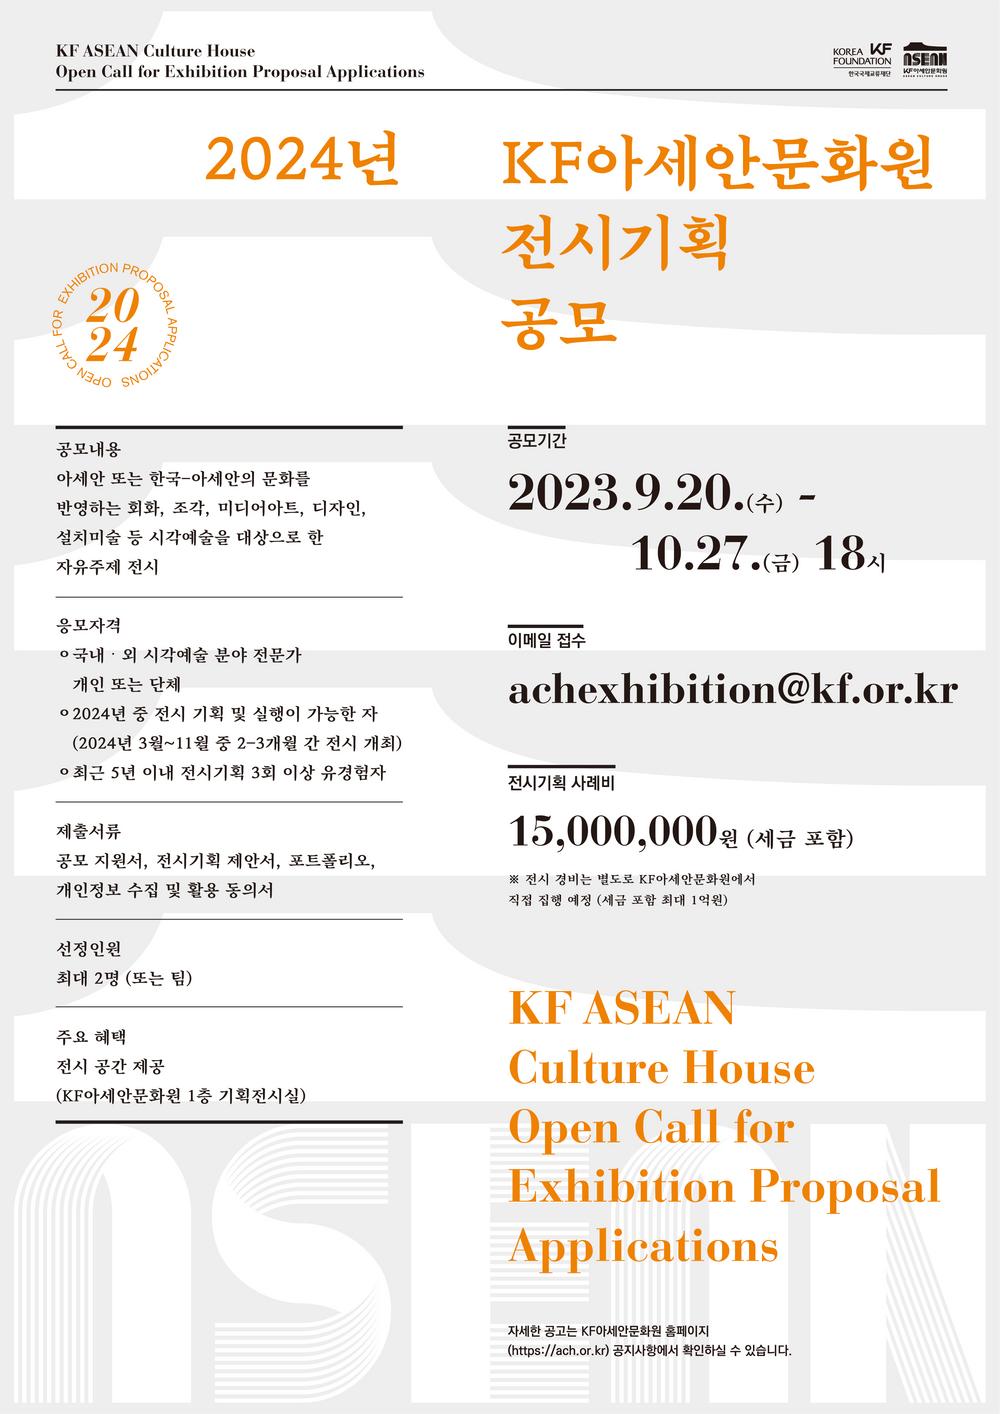 2024 KF-ACH Open Call for Exhibition Proposal Applications